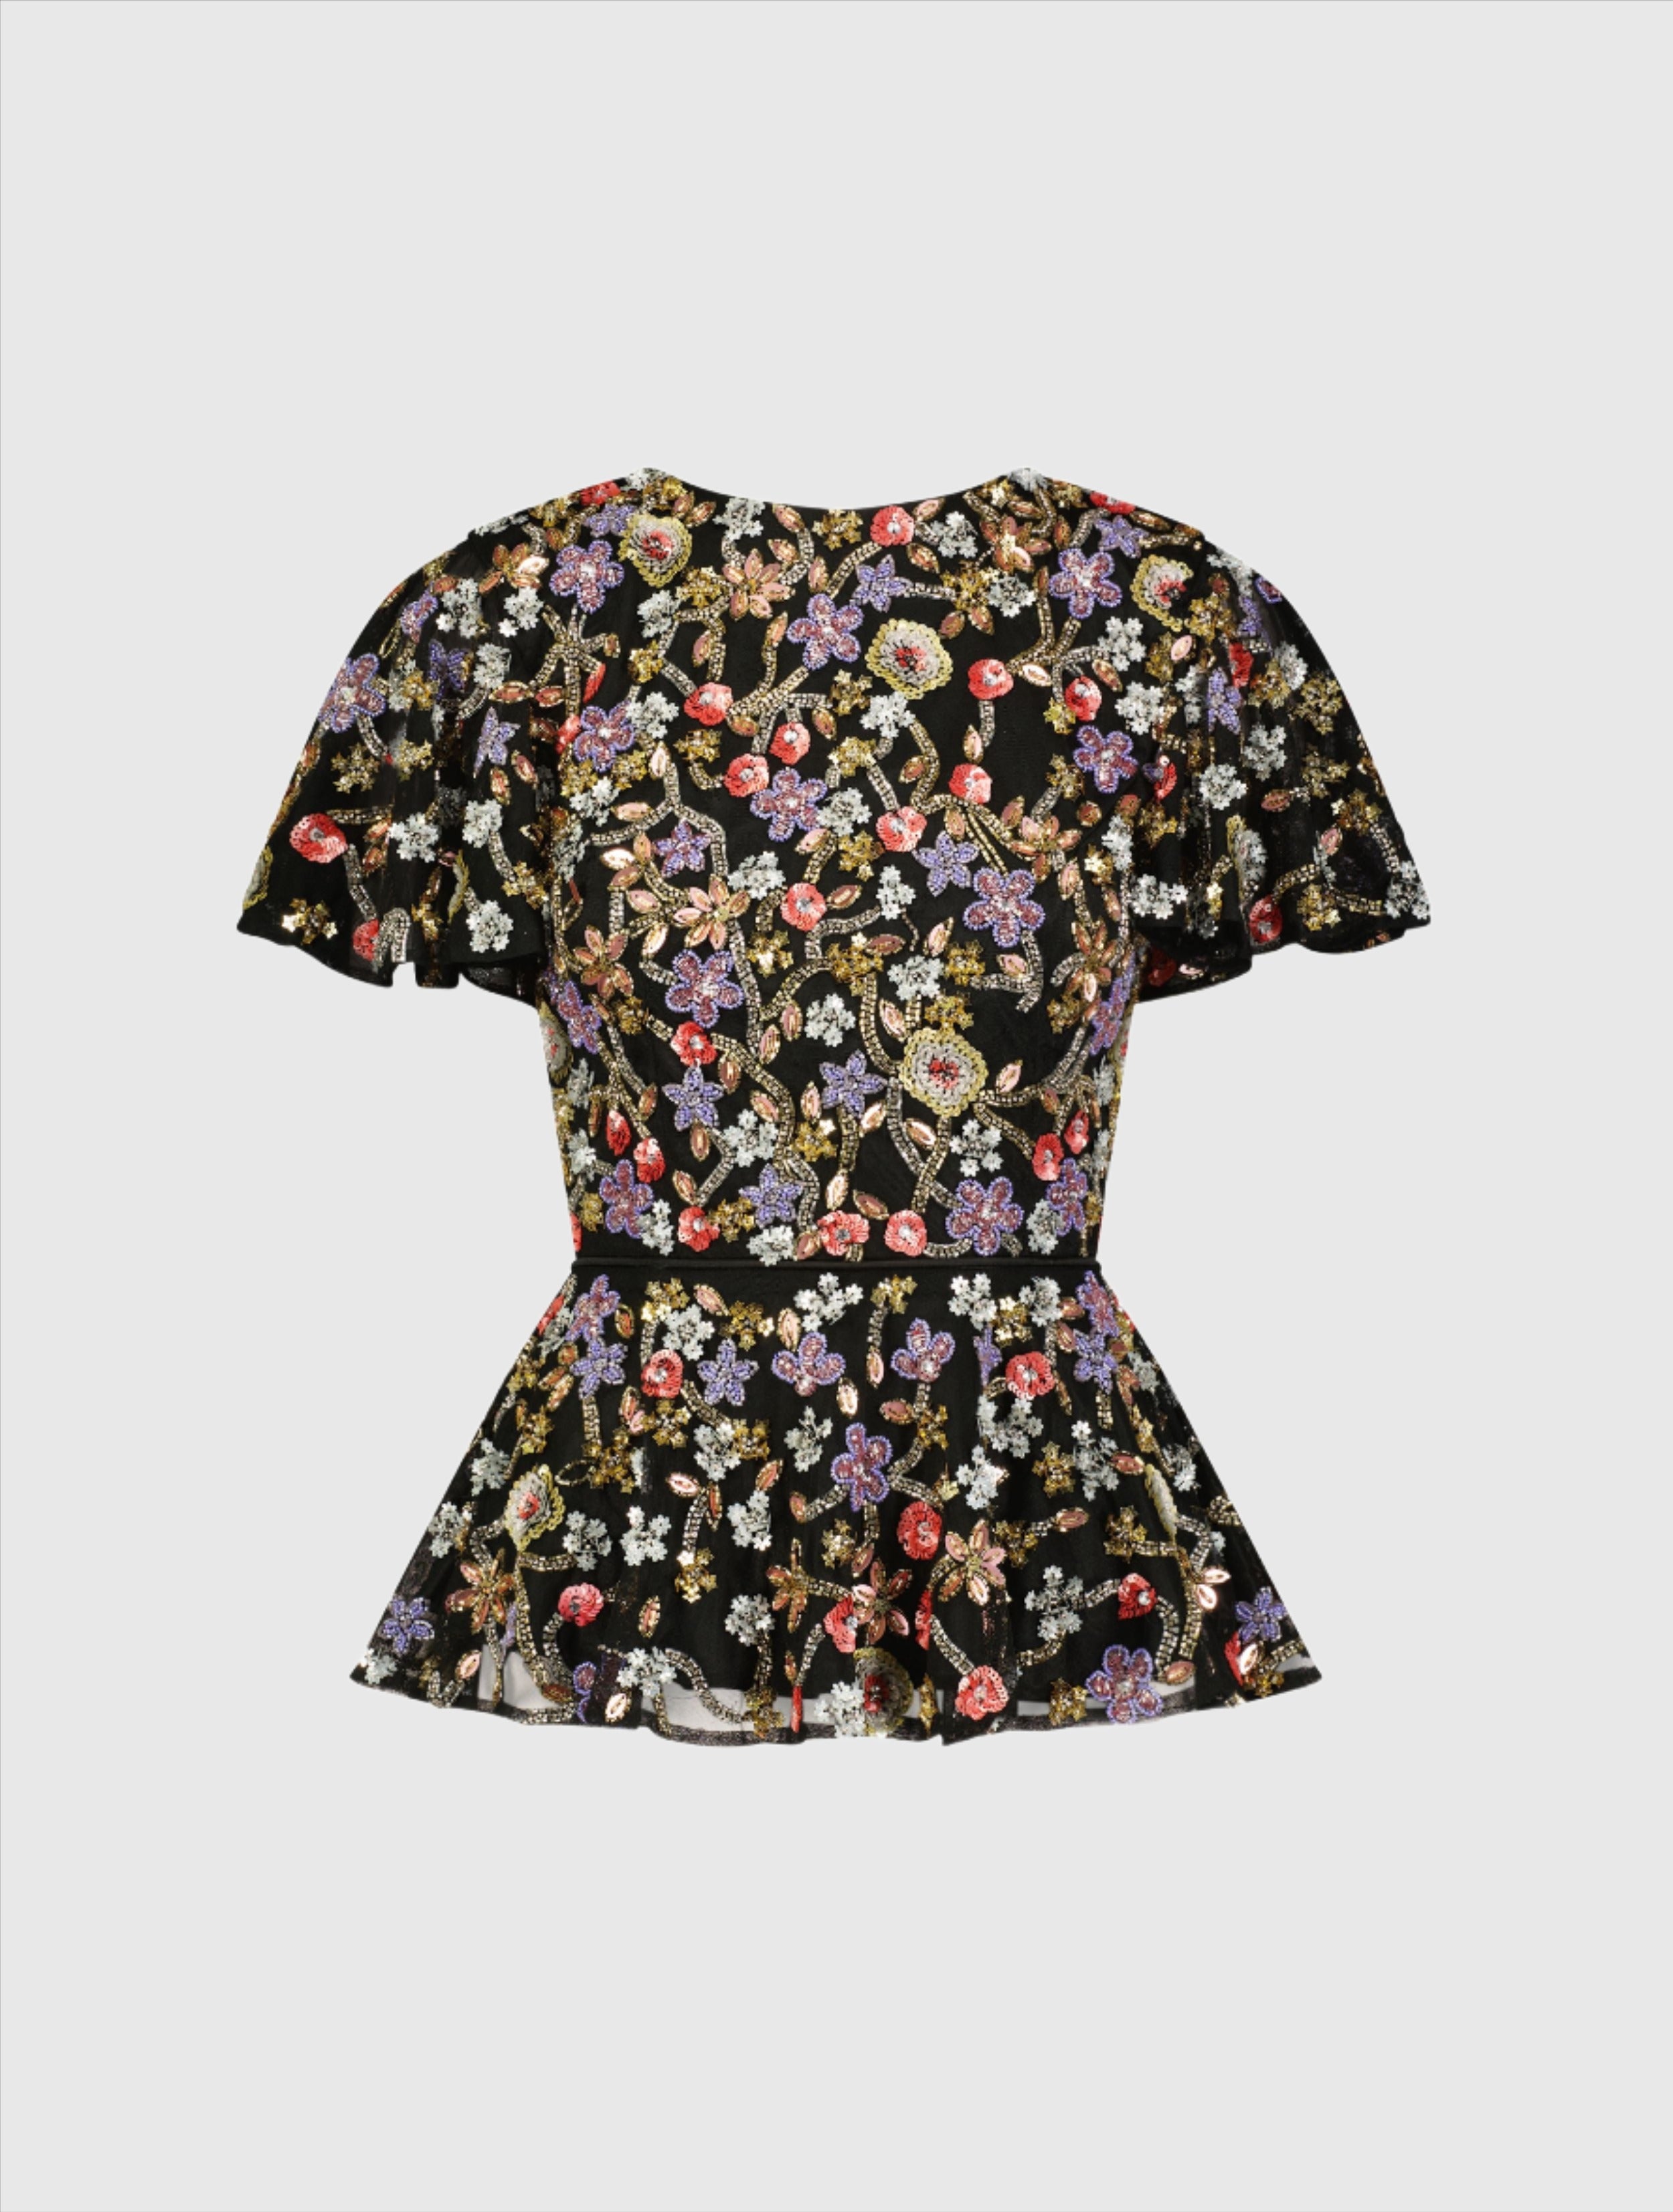 Floral Embellished Butterfly Sleeve Peplum Top